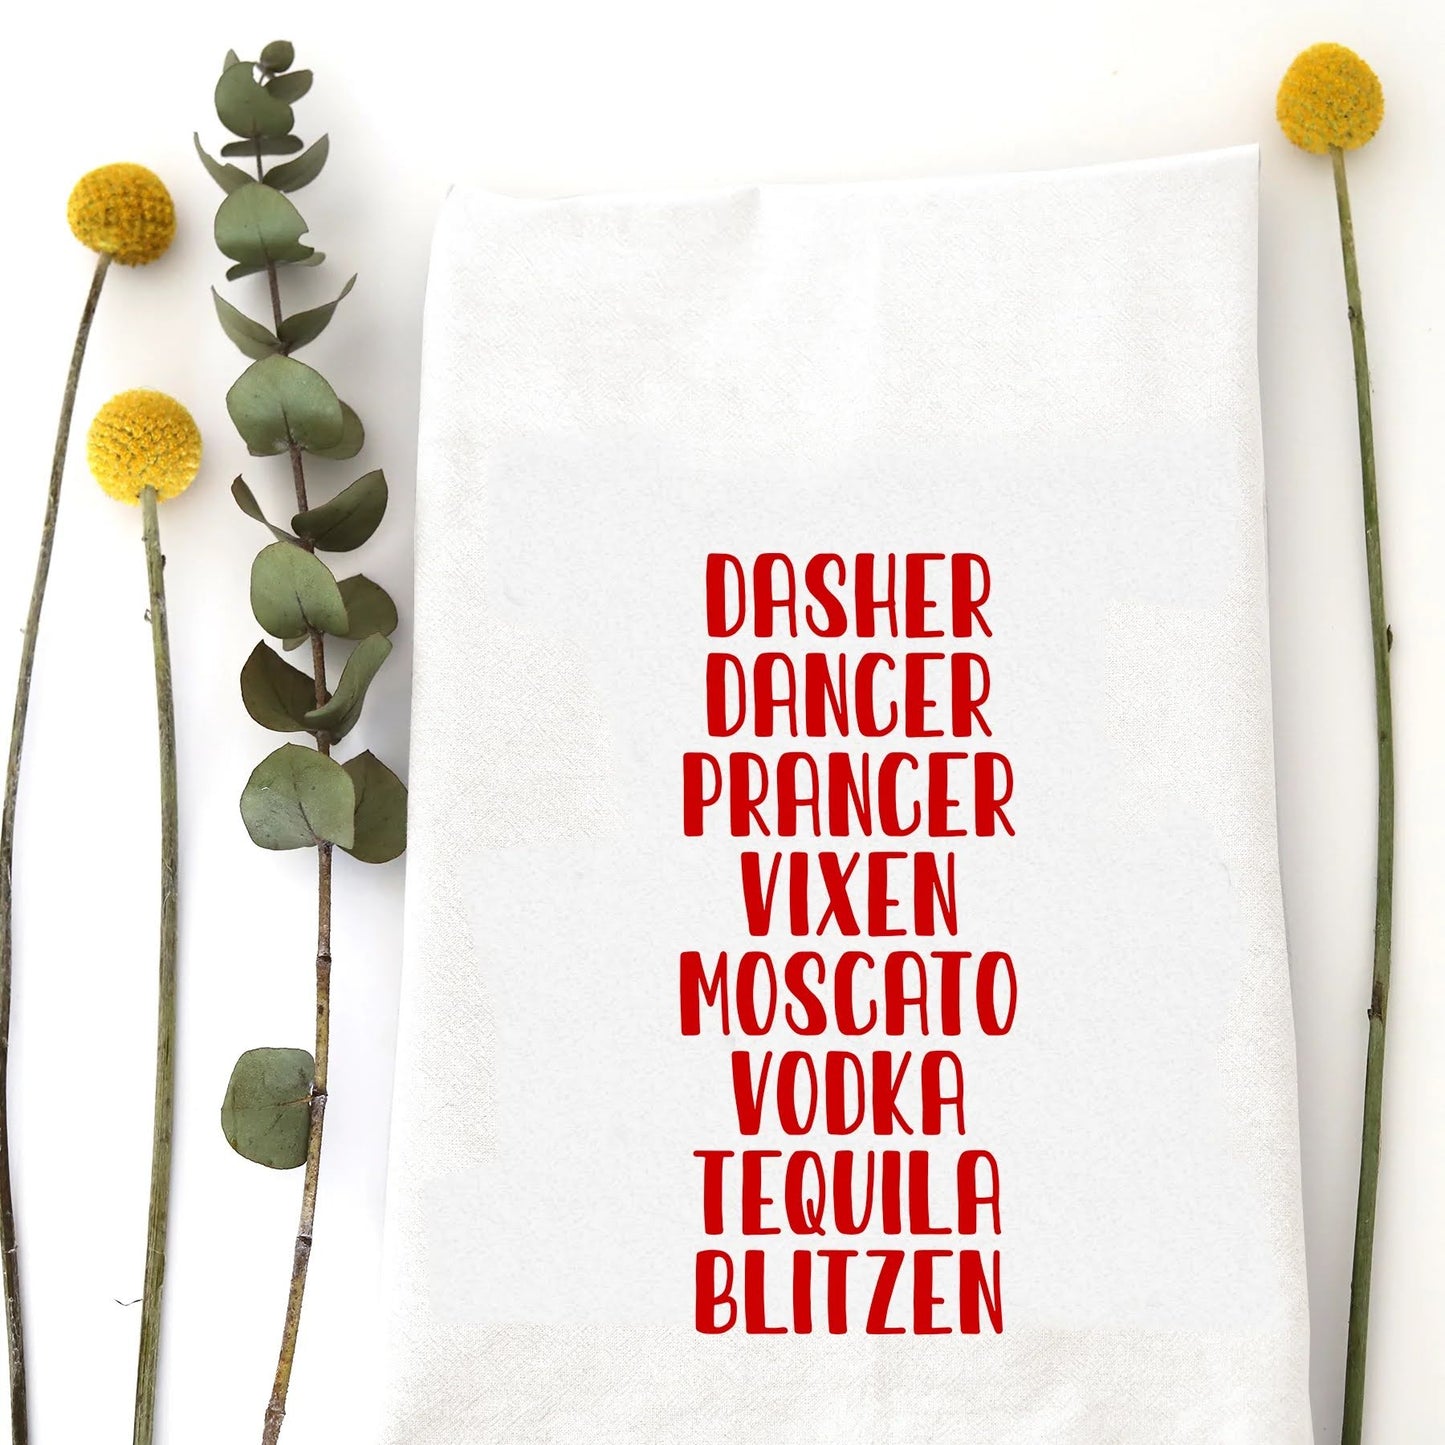 A holiday tea towel with the words "Dasher, Dancer, Prancer, Vixen, Moscato, Vodka, Tequila, Blitzen" printed on it.